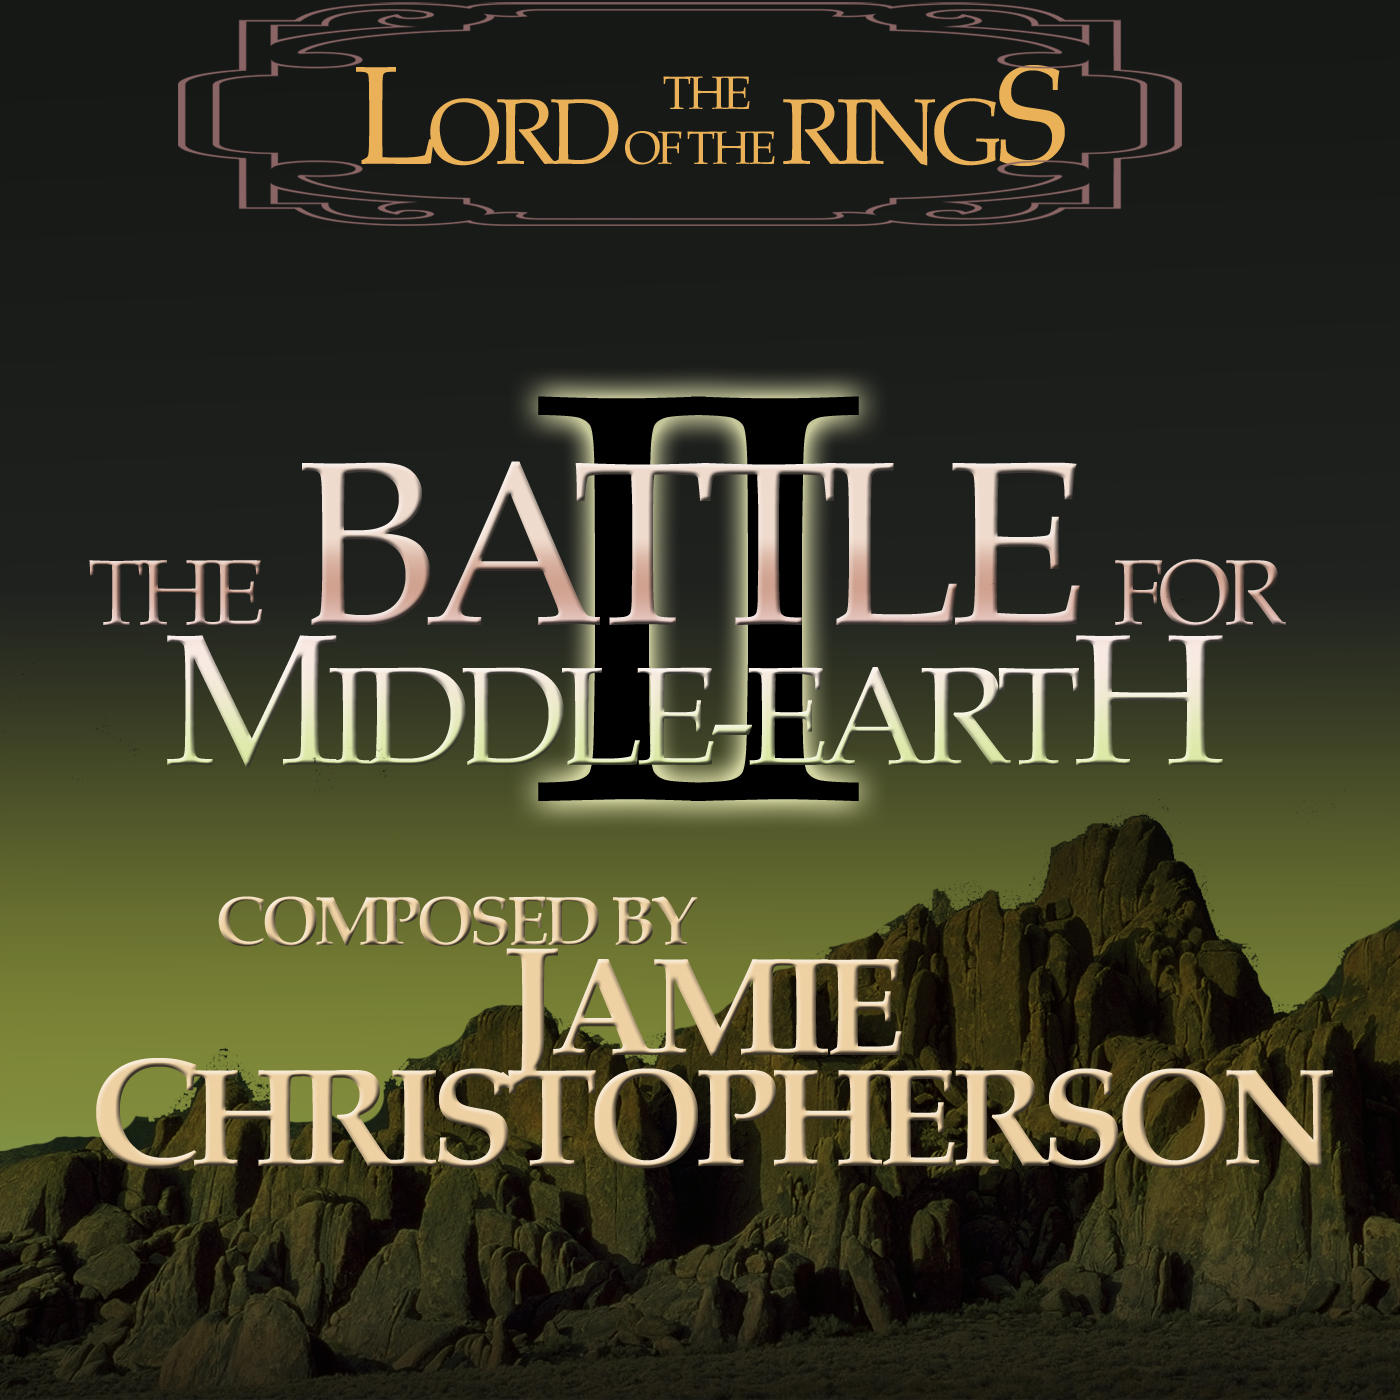 lord of the rings battle for middle earth download free